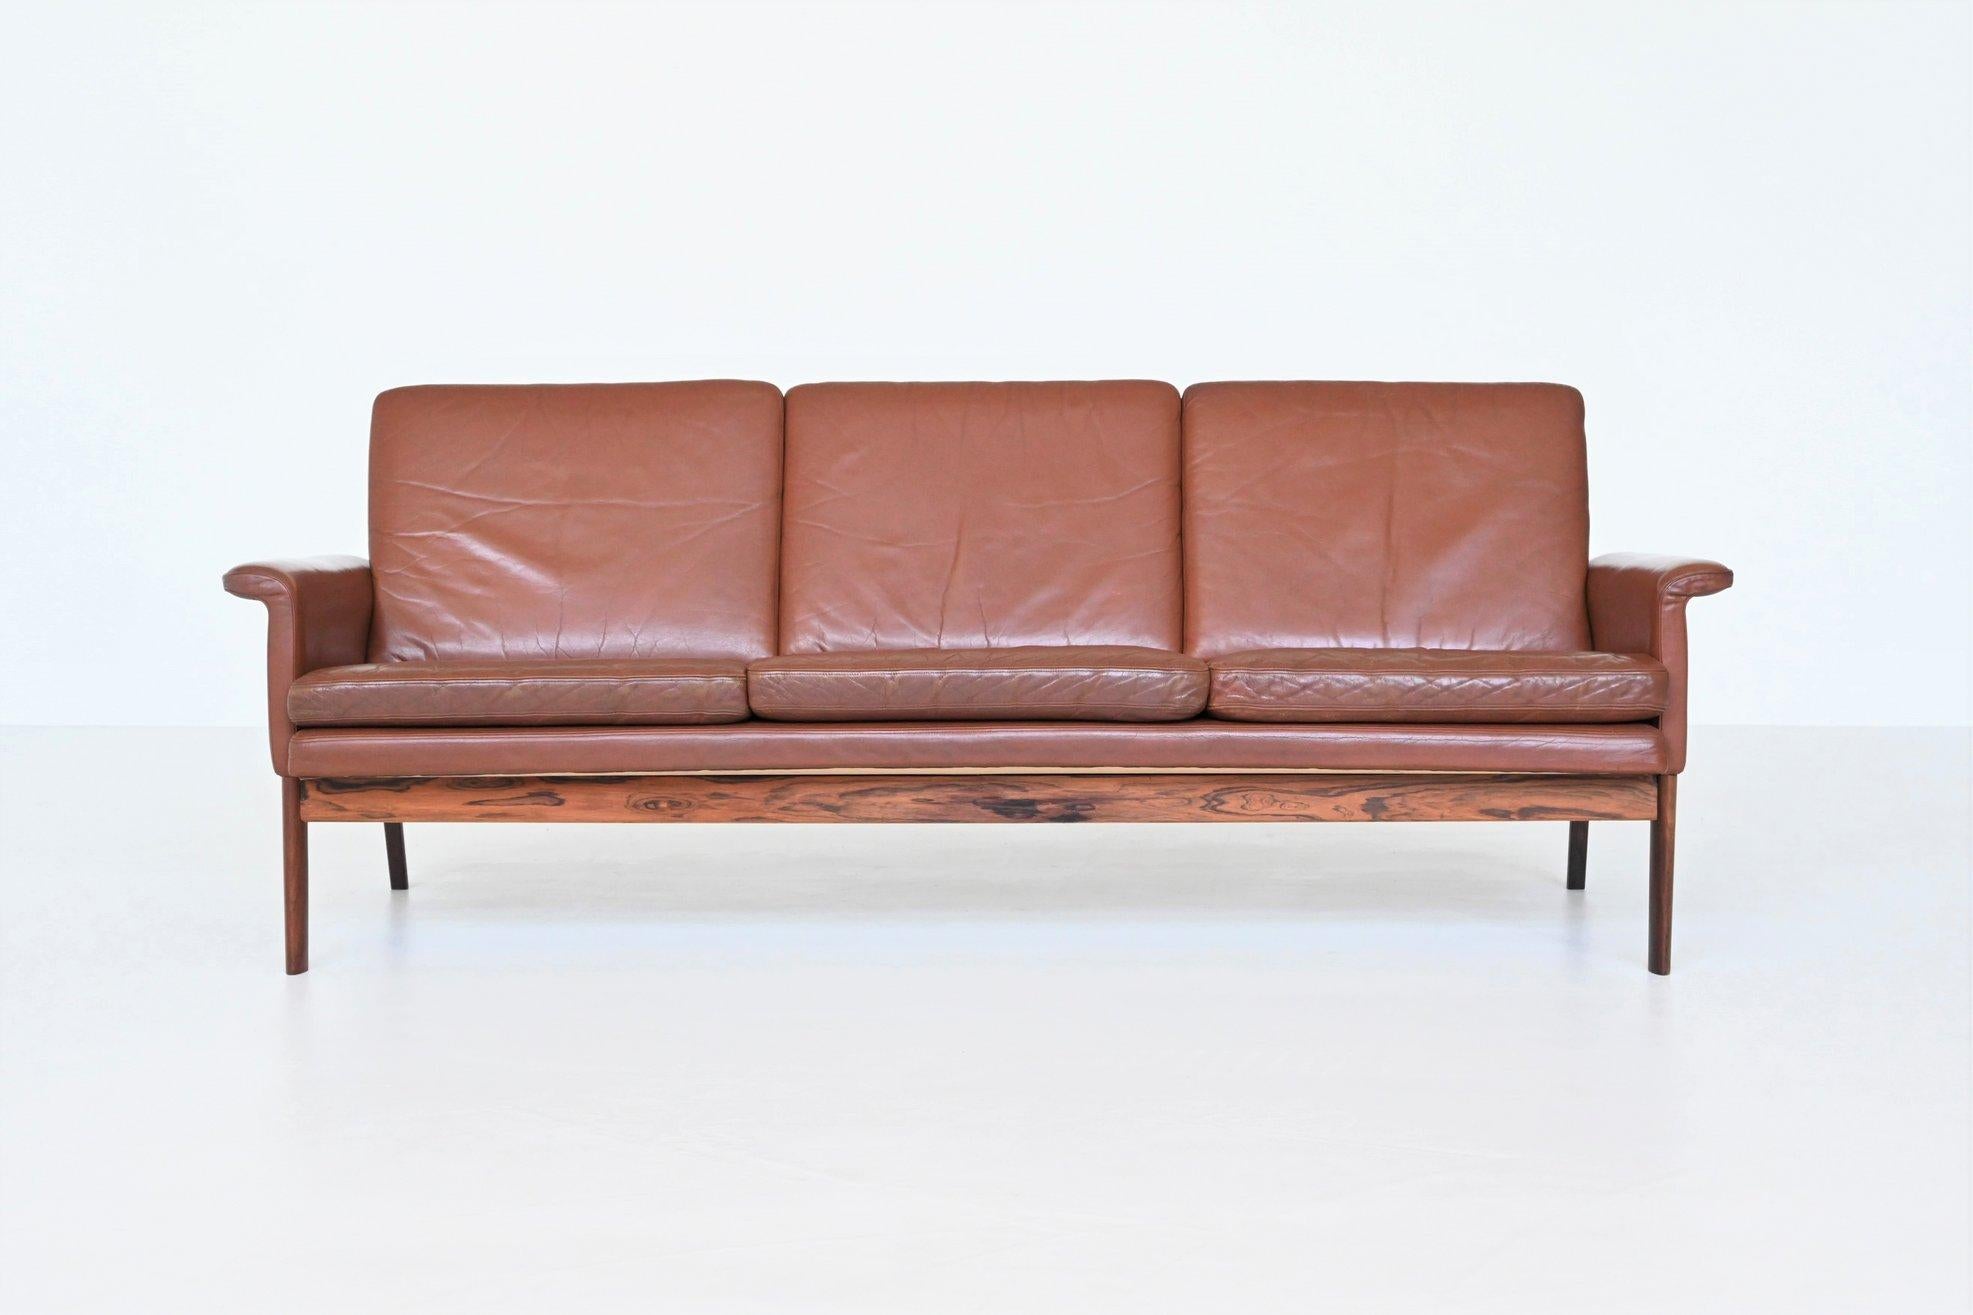 Beautiful shaped 3-seat Jupiter sofa model 218 designed by Finn Juhl for France & Son, Denmark 1965. The sofa is executed in chocolate brown leather supported by a solid rosewood frame. It has very lines and subtle details such as the ever so